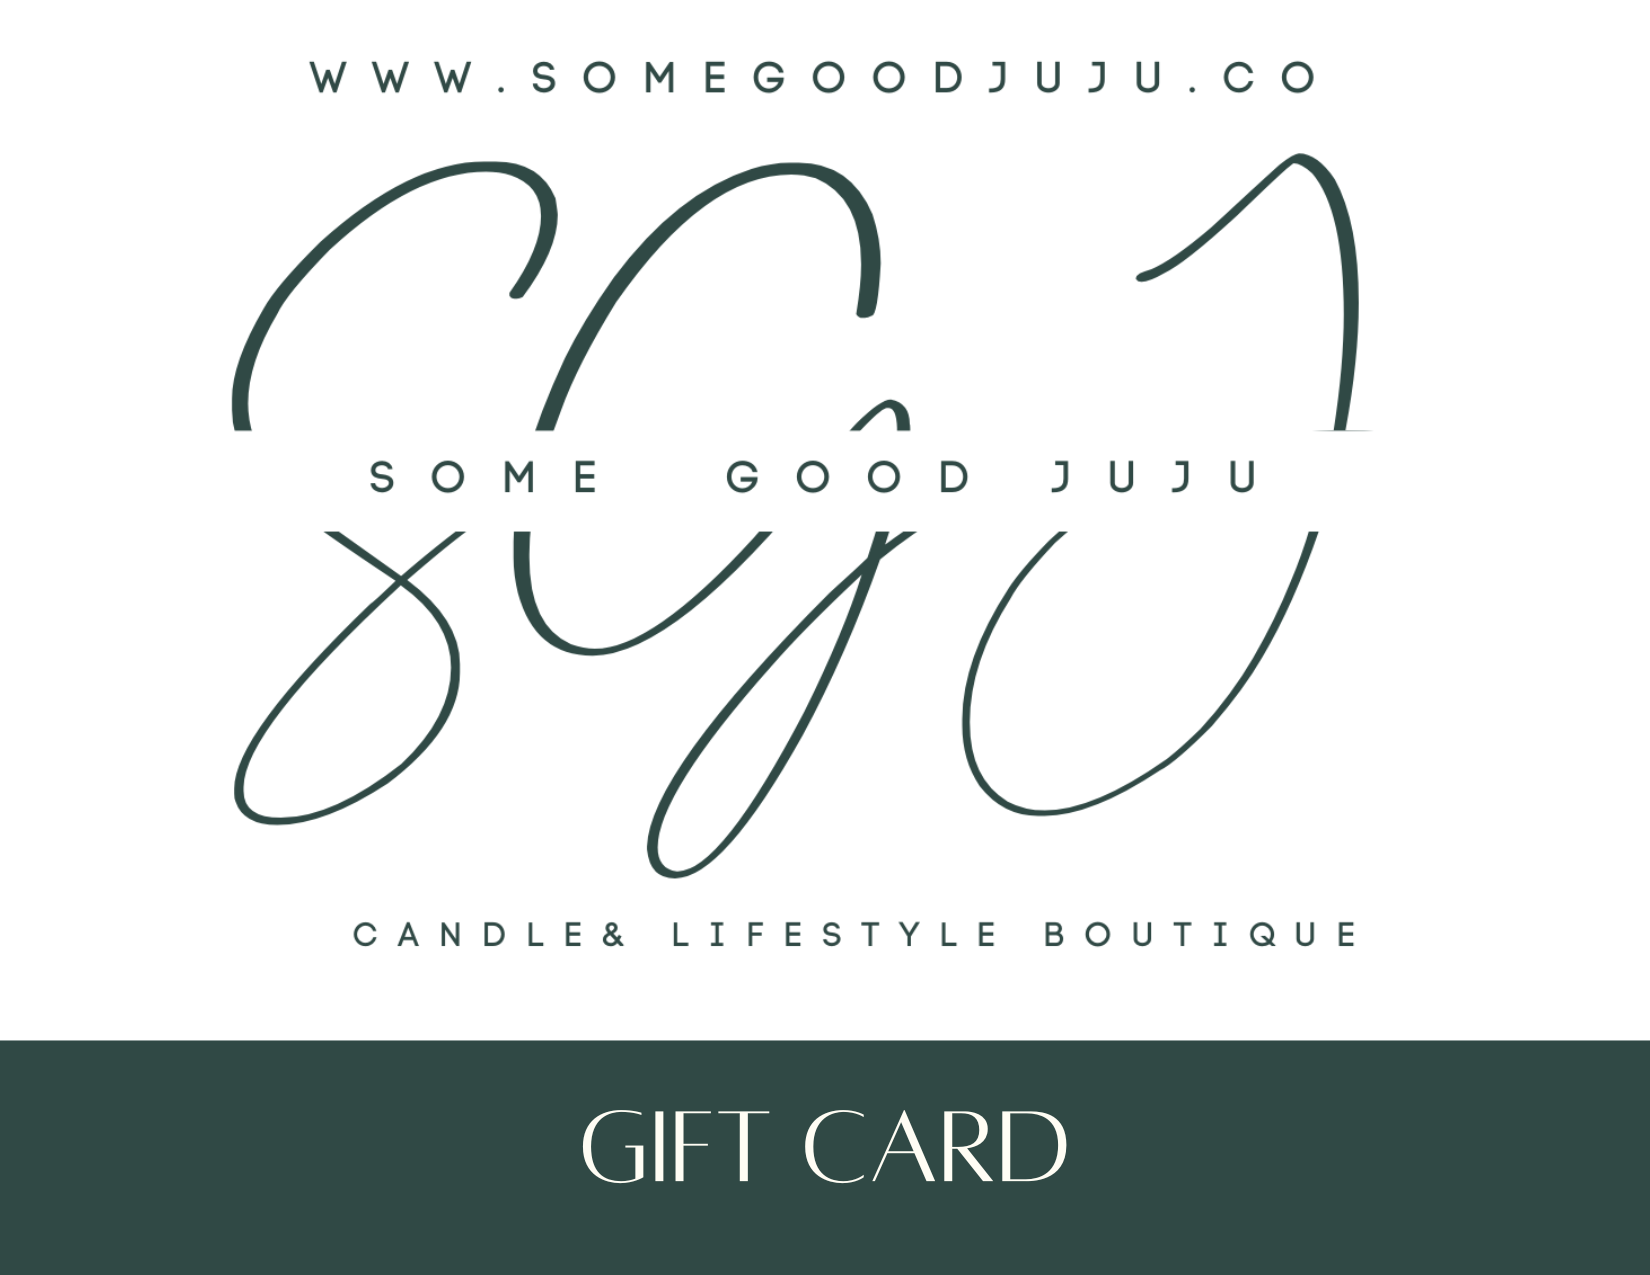 Some Good Juju Gift Card - Some Good JuJu Candle & Lifestyle Boutique 